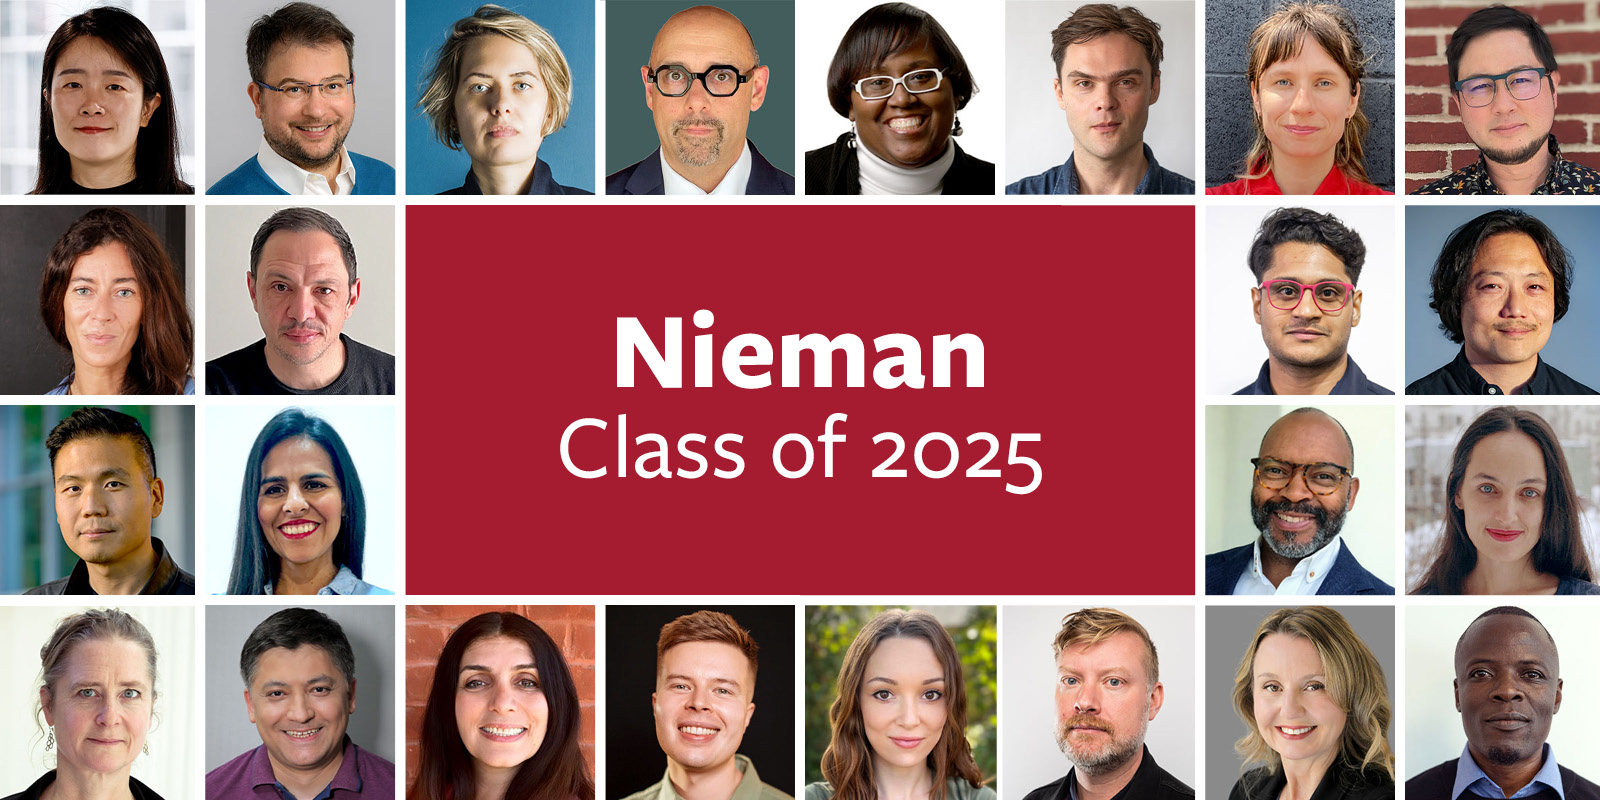 A photo grid shows the 224 journalists selected as Nieman Fellows in the class of 2025 at Harvard University